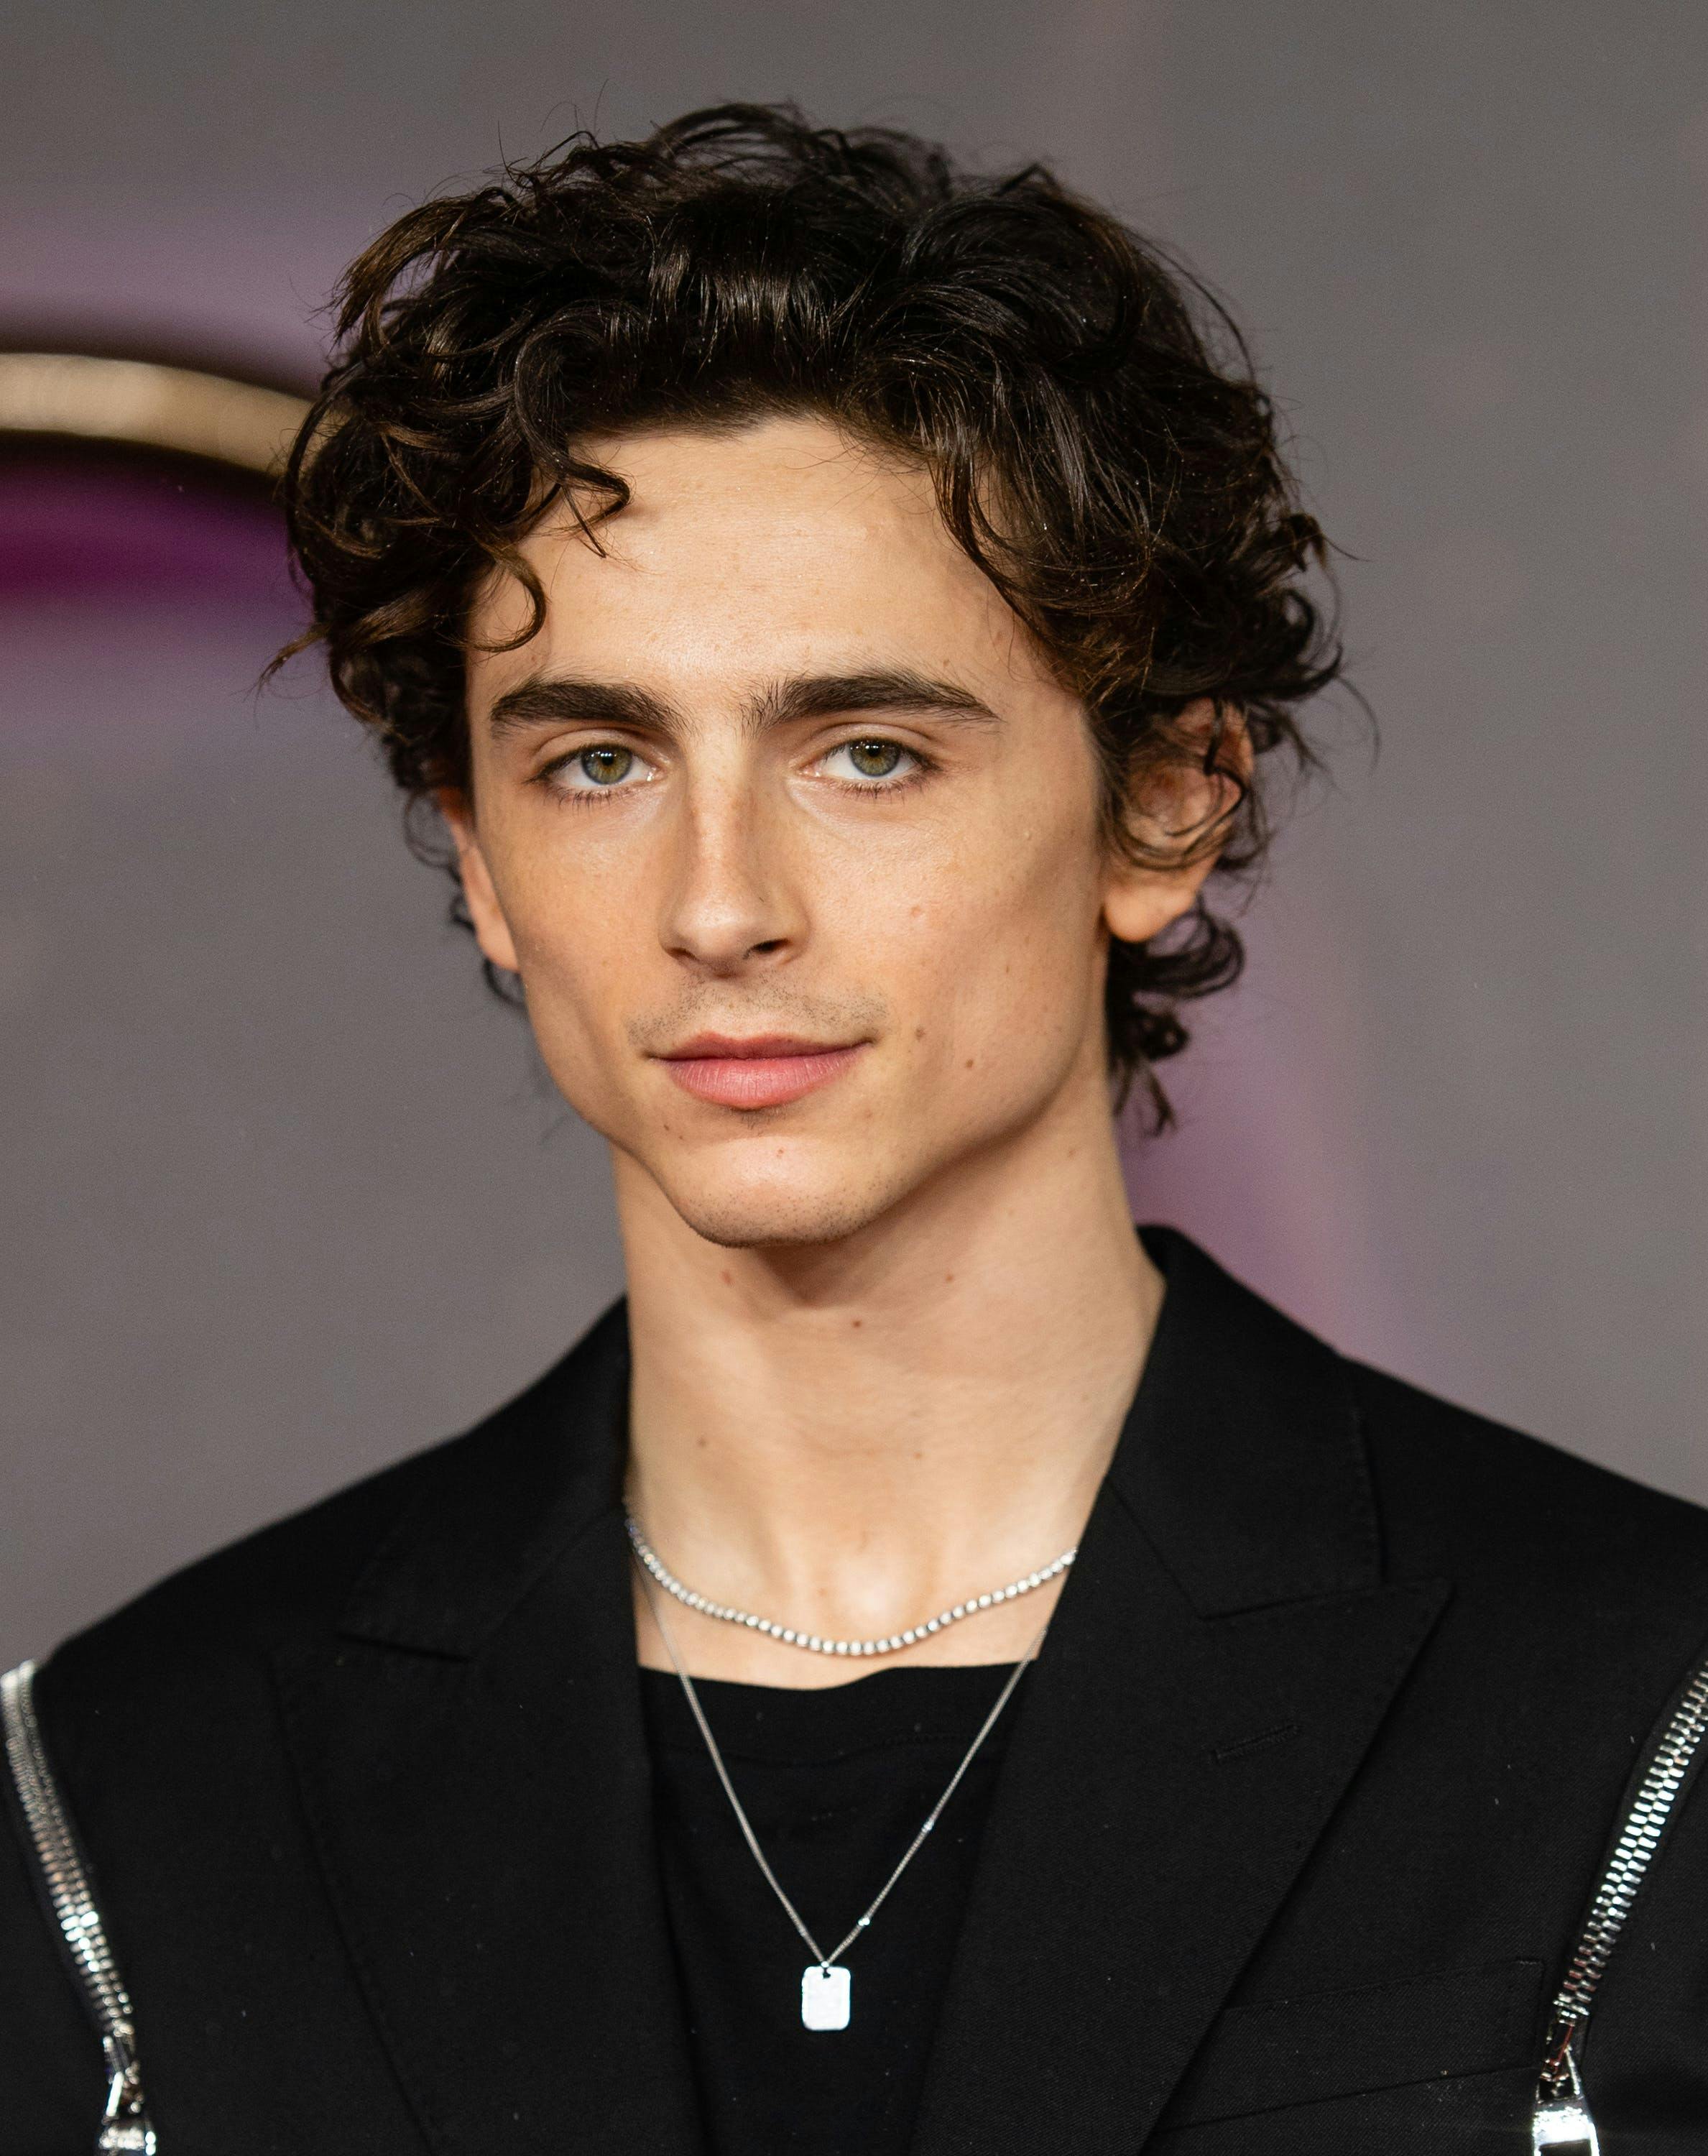 timothee chalamet in a black top looking at the camera